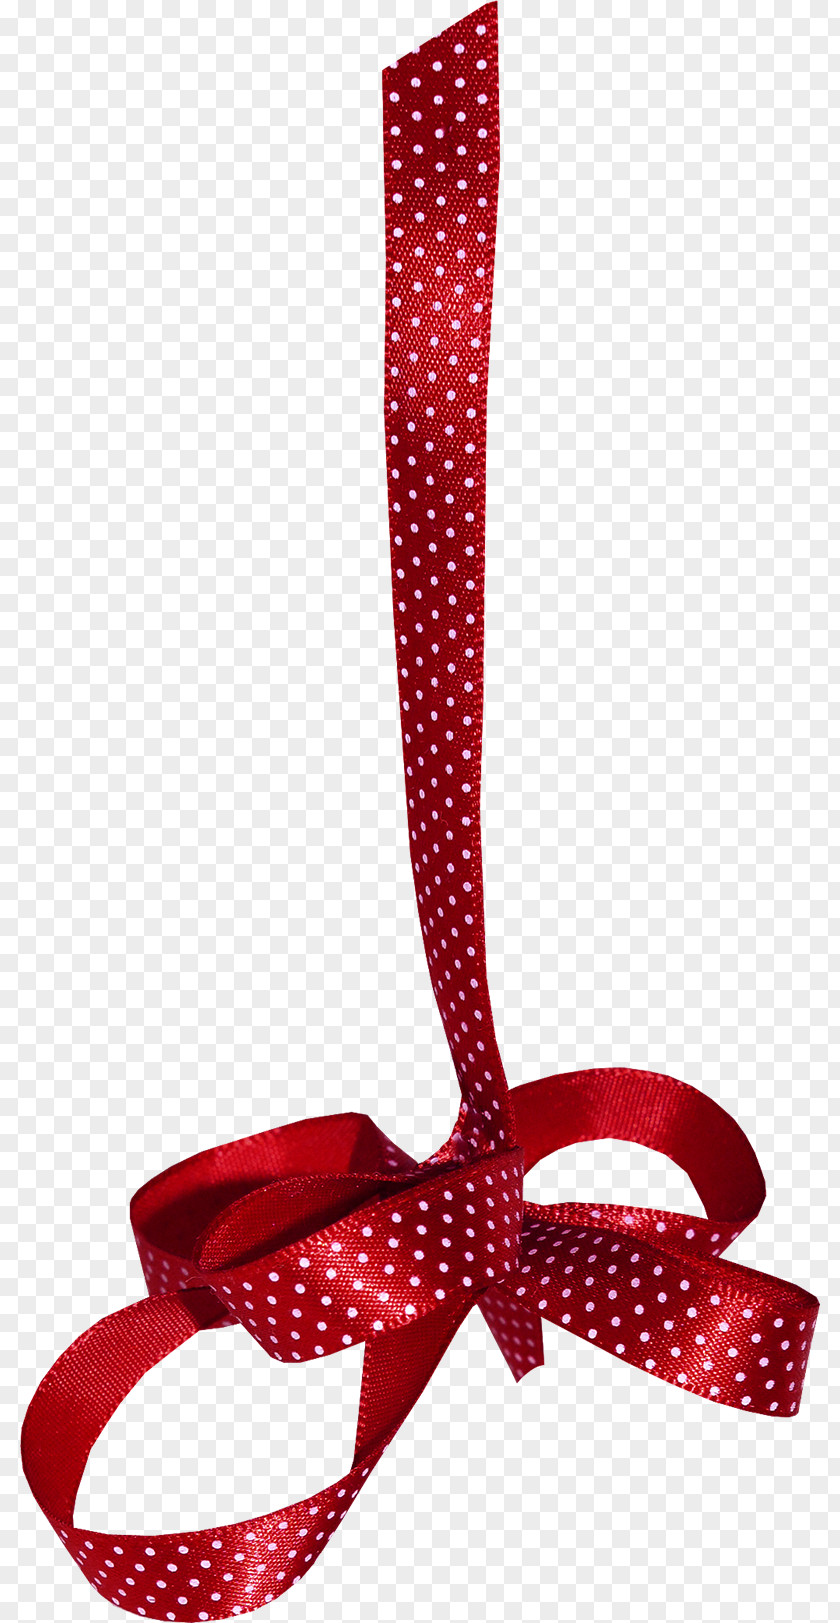 Bow Ribbon Shoelace Knot Clip Art PNG